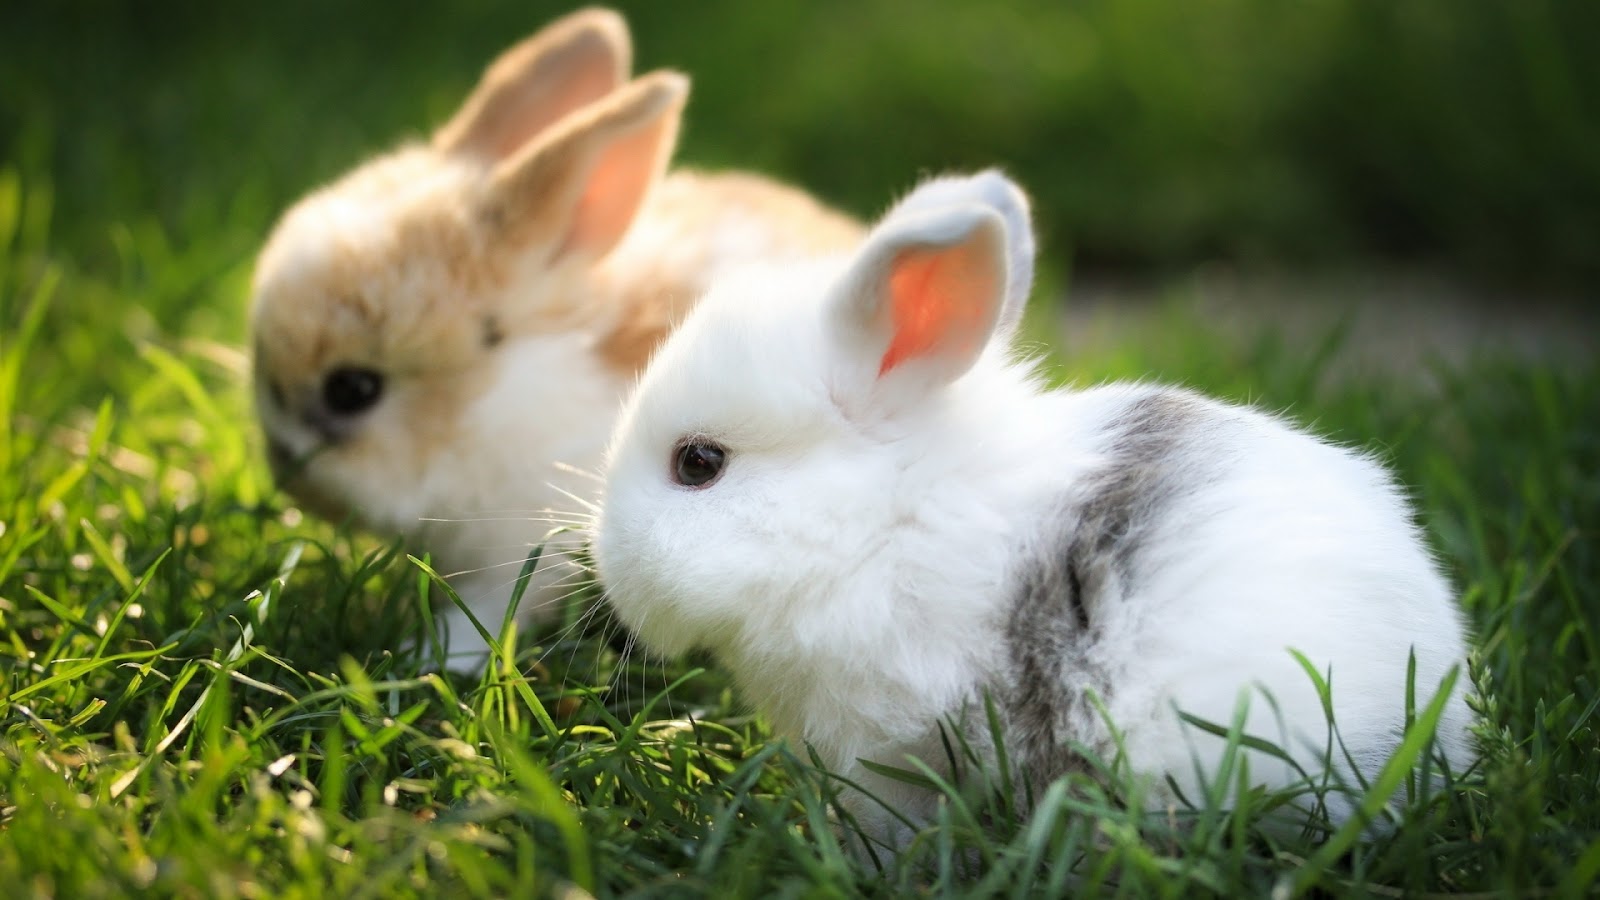 Cute Baby Rabbits HD Wallpaper Background Image